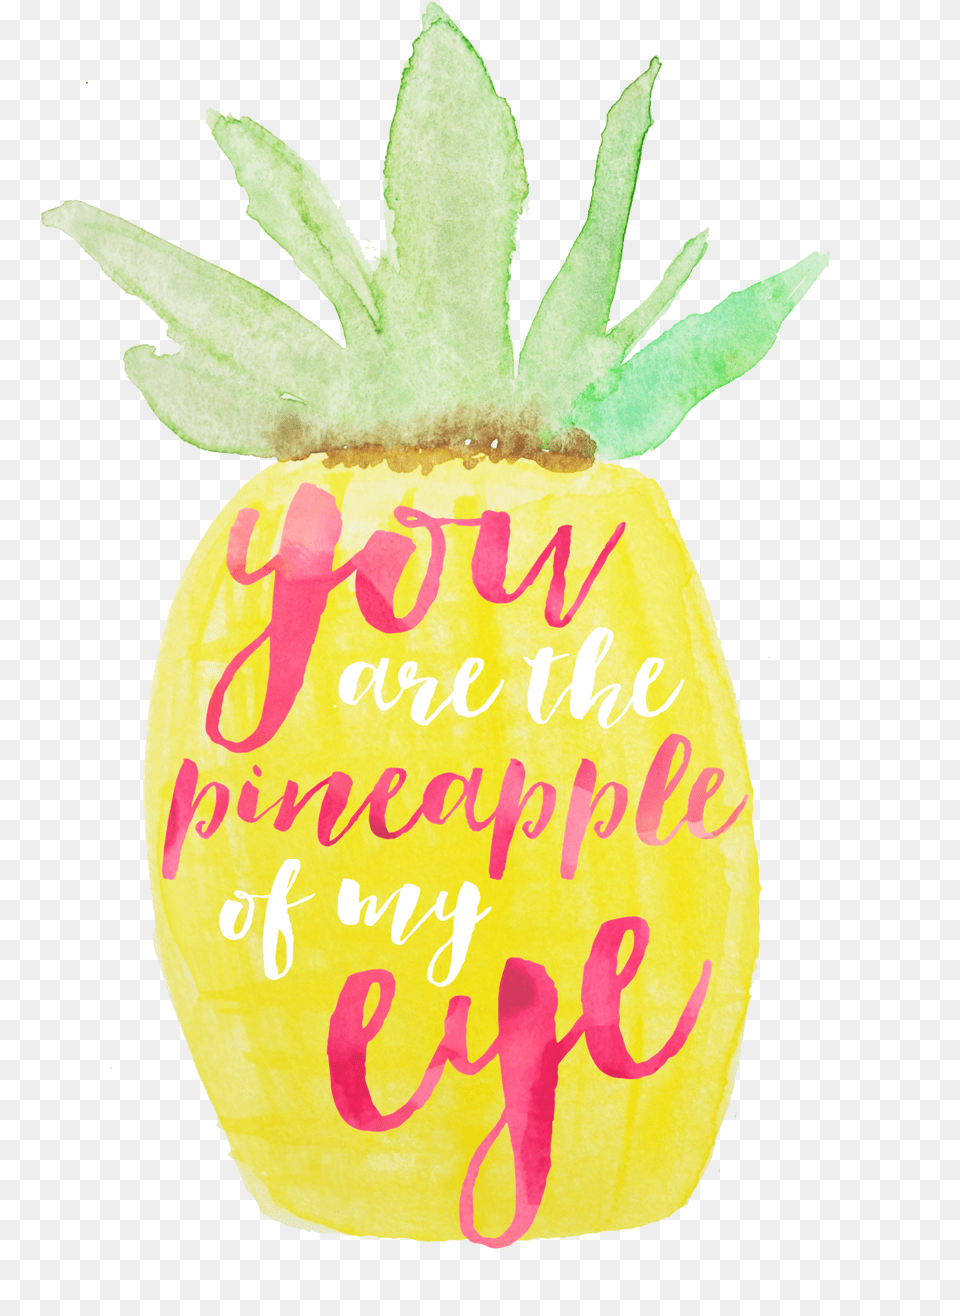 You Are The Pineapple Of My Eye Cute Quotes About Pineapple, Food, Fruit, Plant, Produce Free Png Download